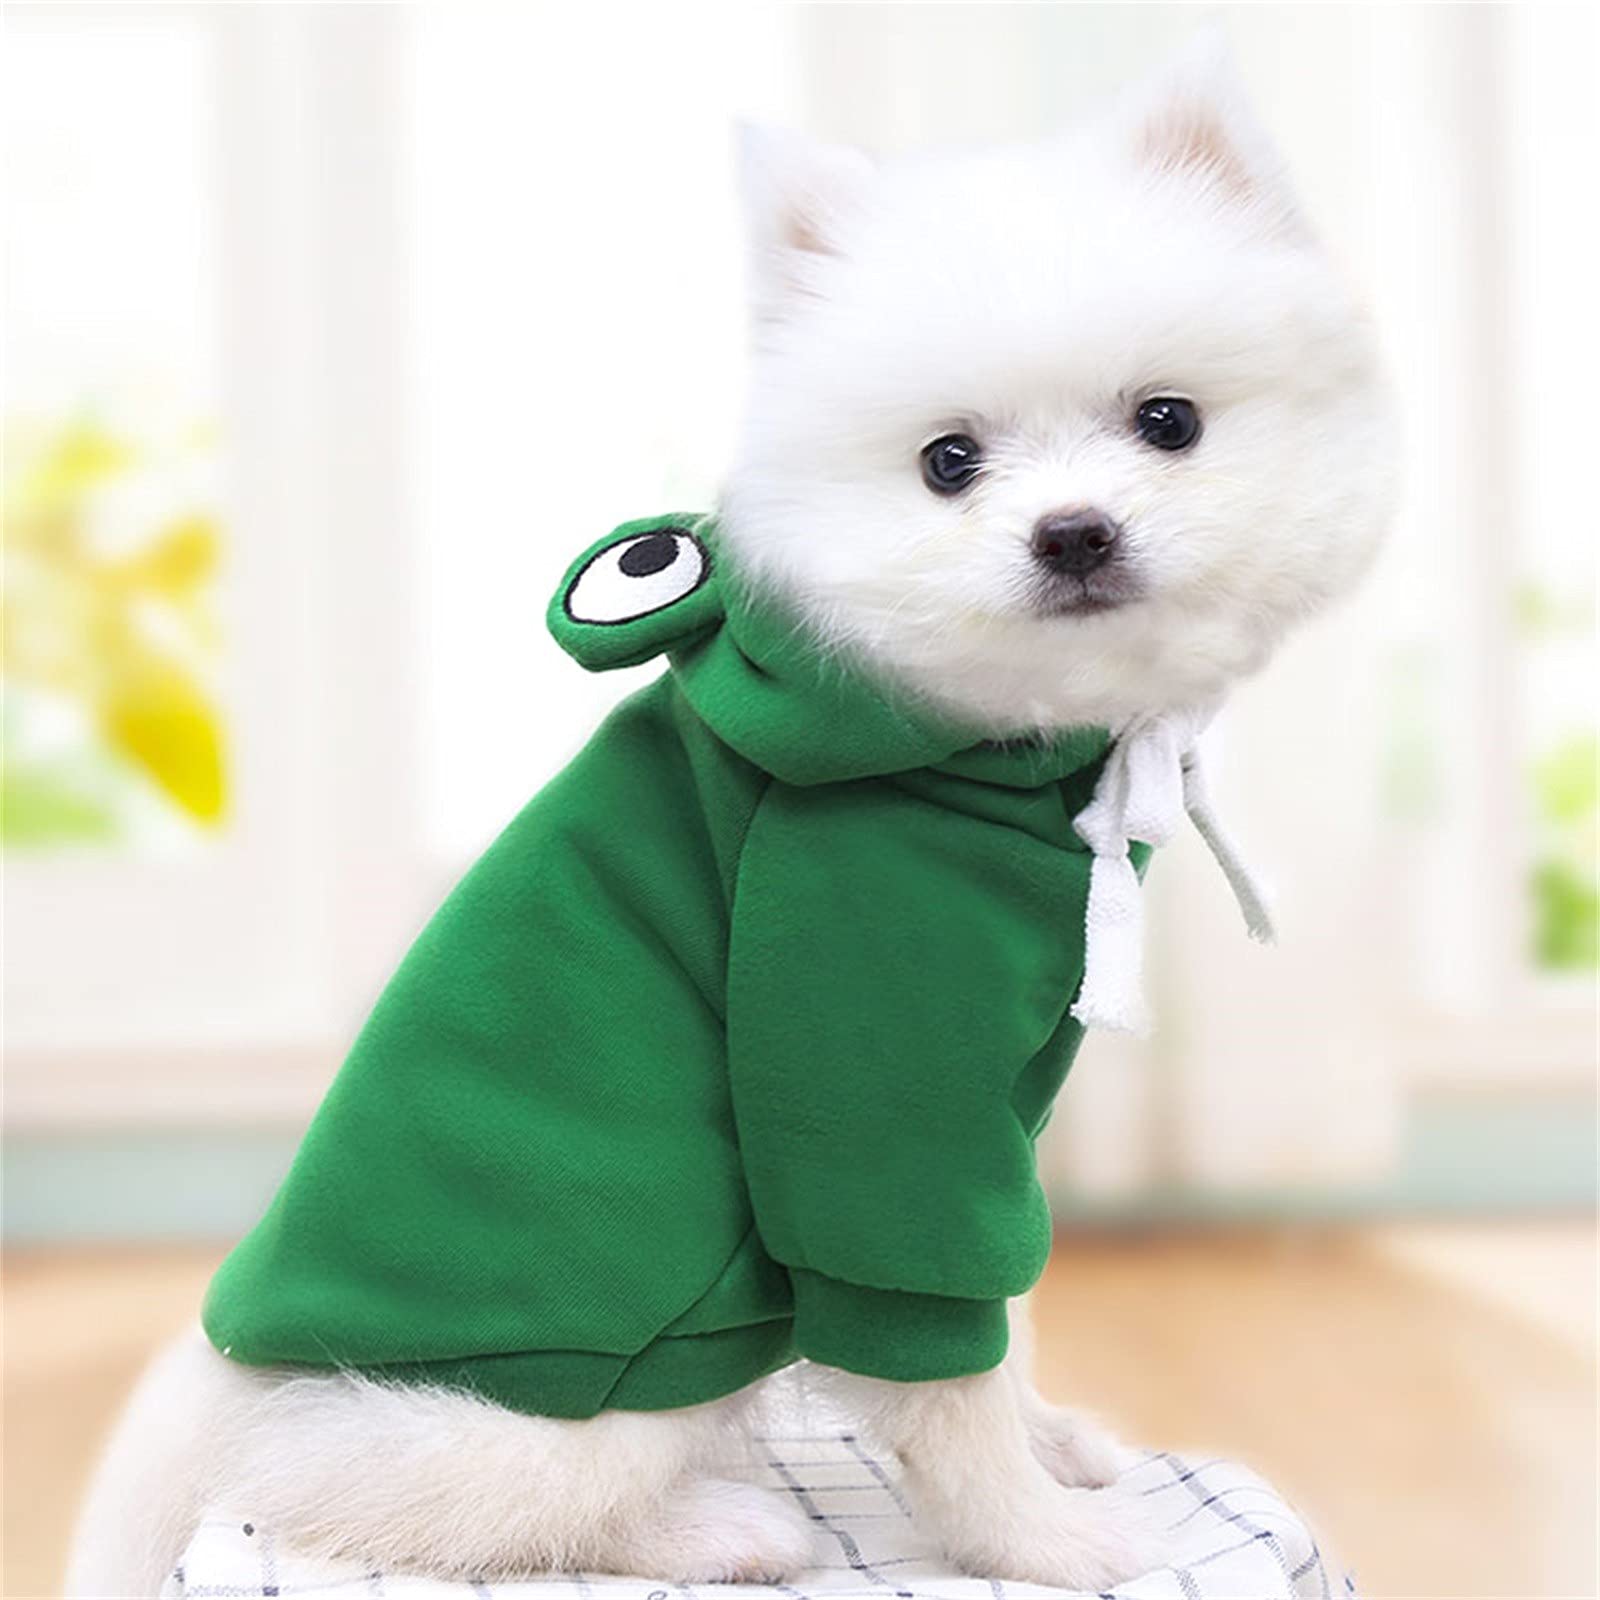 Cute Pet Costume Warm Hoodie for Dogs and Cats Dress Up Outfit Clothes for Small Medium Sized Pets Puppies Kitten